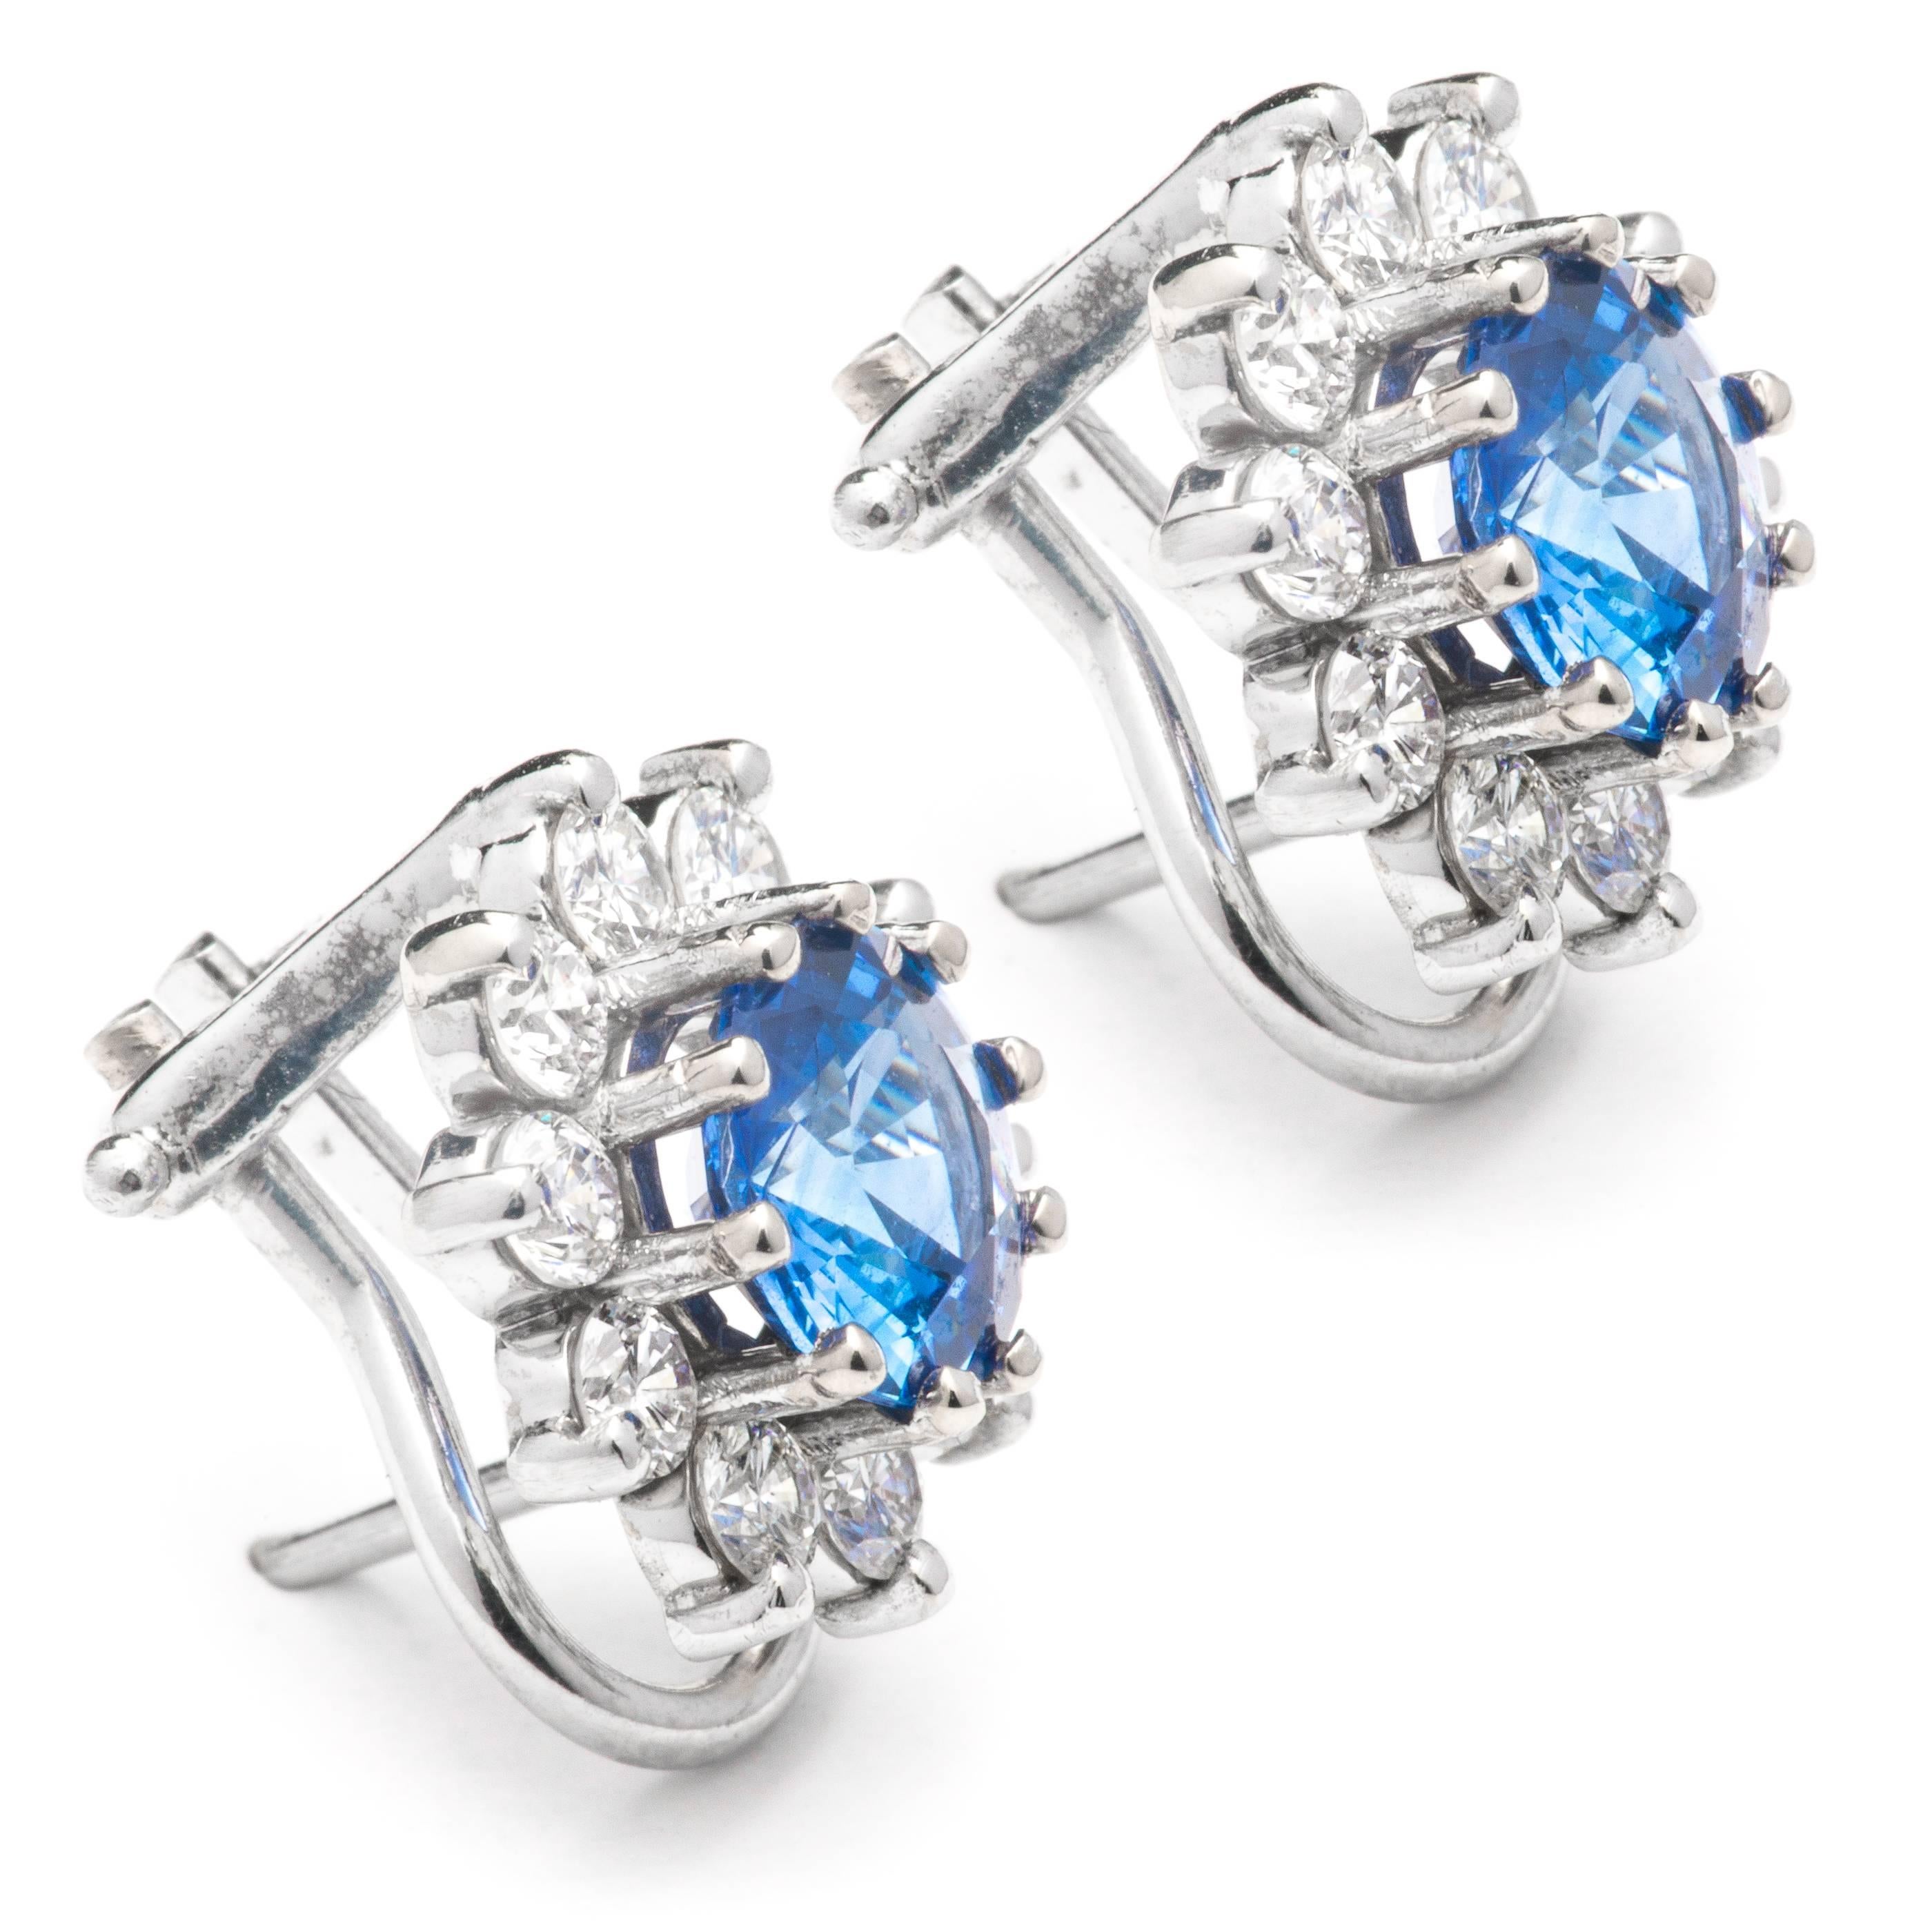 A pair of very fine quality sapphire, and diamond earrings in 18 karat white gold.  Centered by a pair of perfectly matched exceptionally fine quality sapphires these earrings feature a halo of high quality brilliant cut diamonds.

Of exceptionally